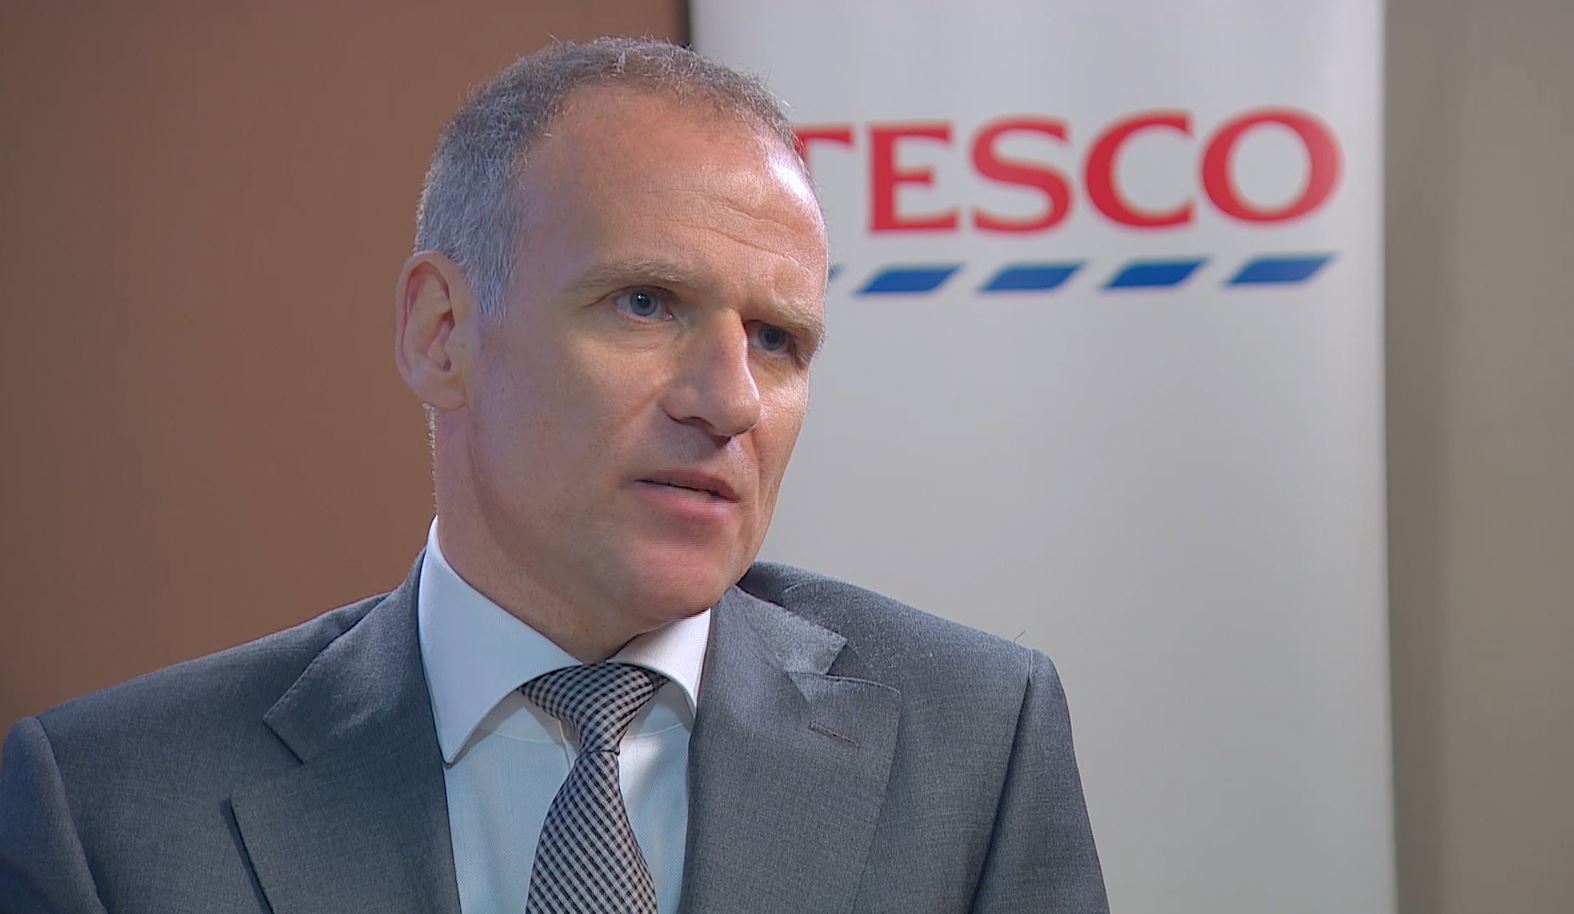 Tesco CEO Dave Lewis refuses to blame past management after supermarket suffers £6.4bn losses - dave-lewis